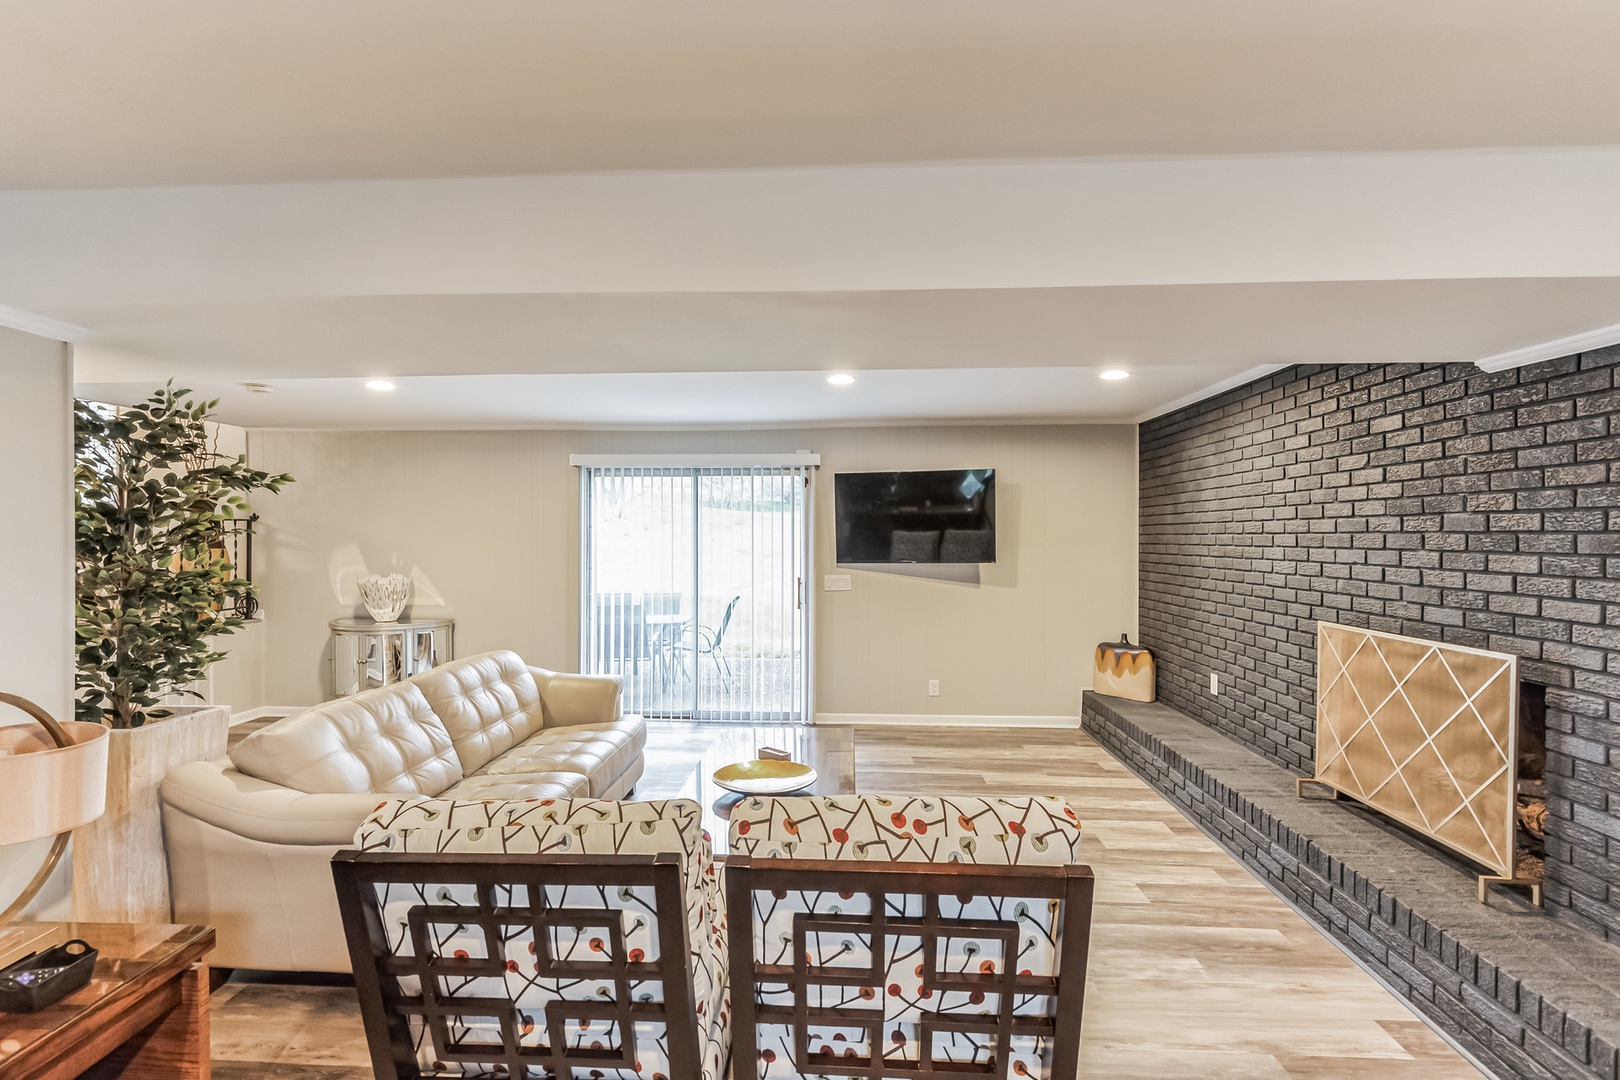 Living area with ample seating, Smart TV, and bar